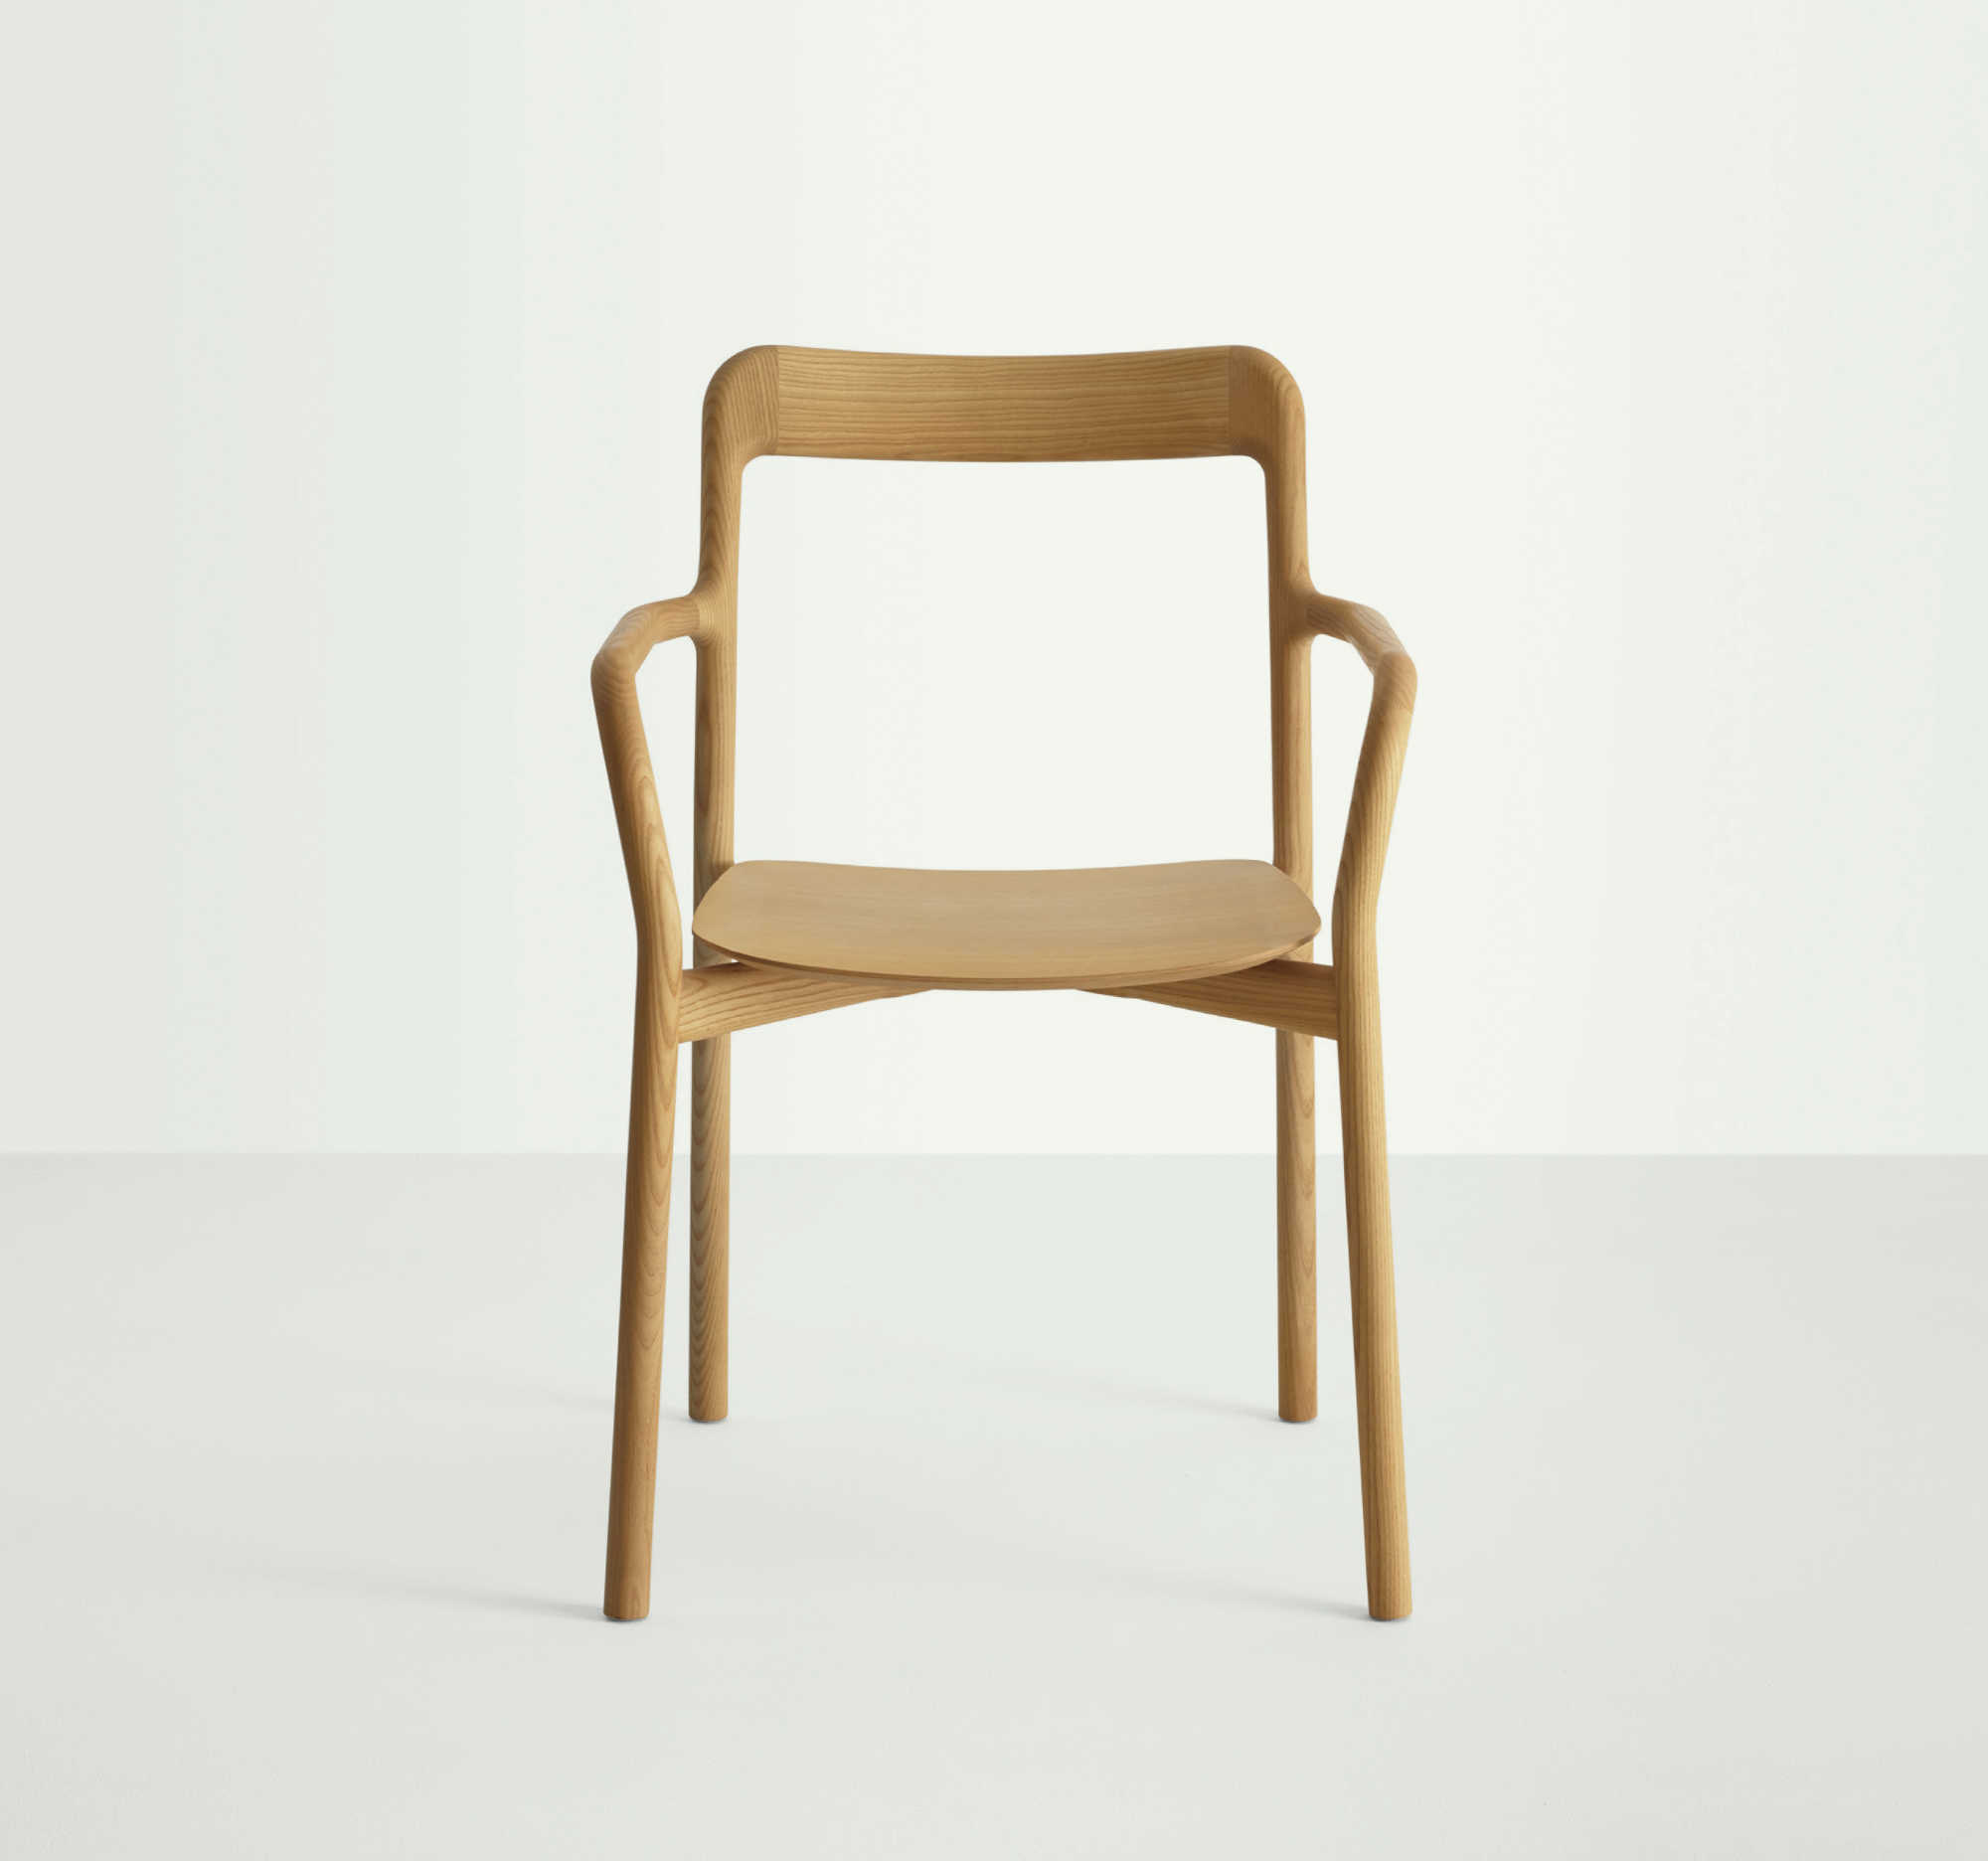 Branca Chair, 2010, by Kim Colin of Industrial Facility